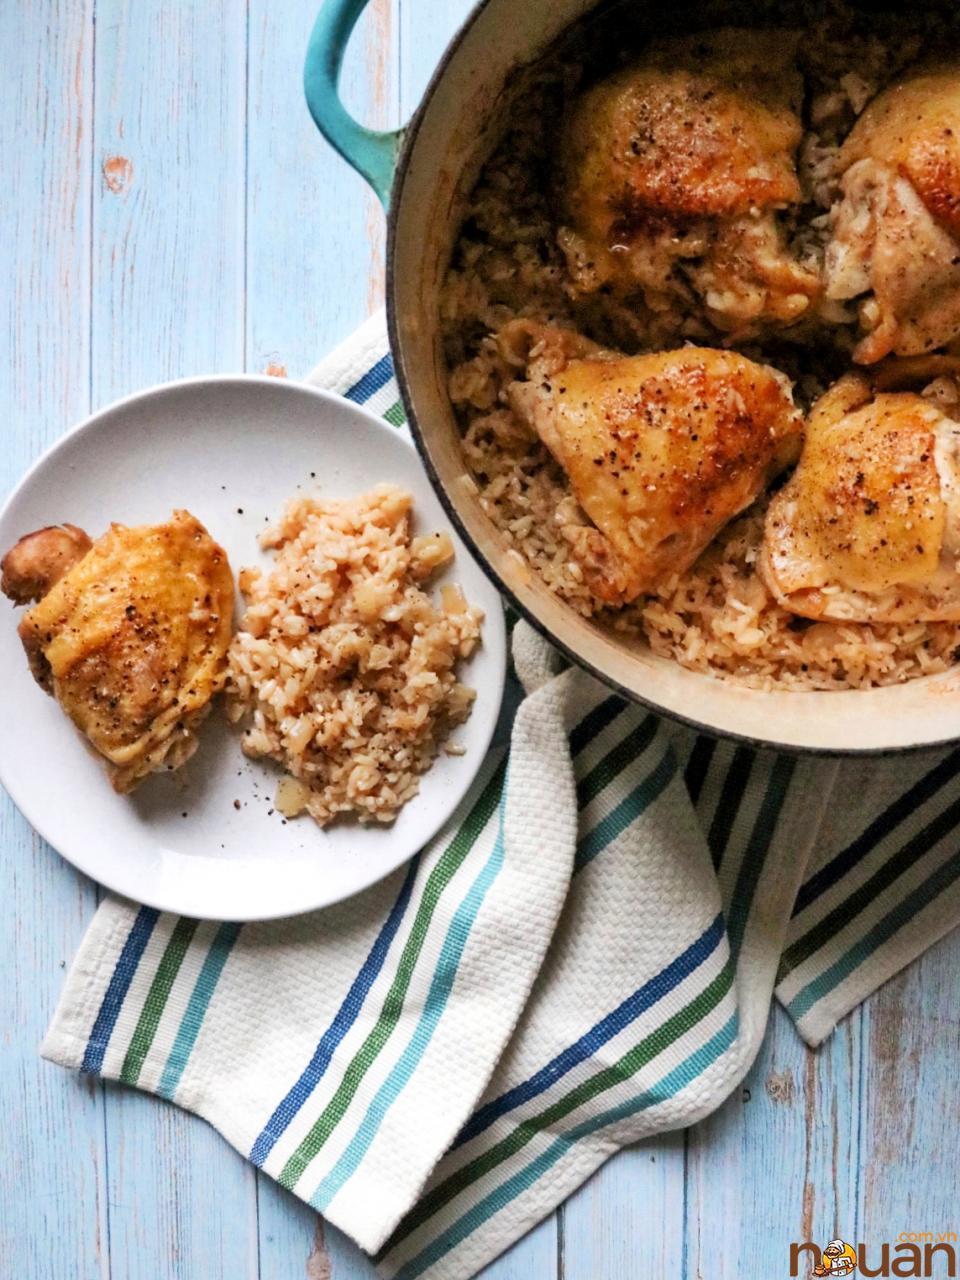 This chicken and rice dinner is comforting and family-friendly, and it's a great option on cool nights when you need a full meal without dirtying up lots of pans &mdash; it's made in a single Dutch oven after all. &quot;Made it exactly like the recipe stated. Was fantastic! Second time I added a touch less water, so the rice was fluffier. AMAZING! This is definitely going into the weekly rotation for quick and easy meal,&quot; writes reviewer Audra. 